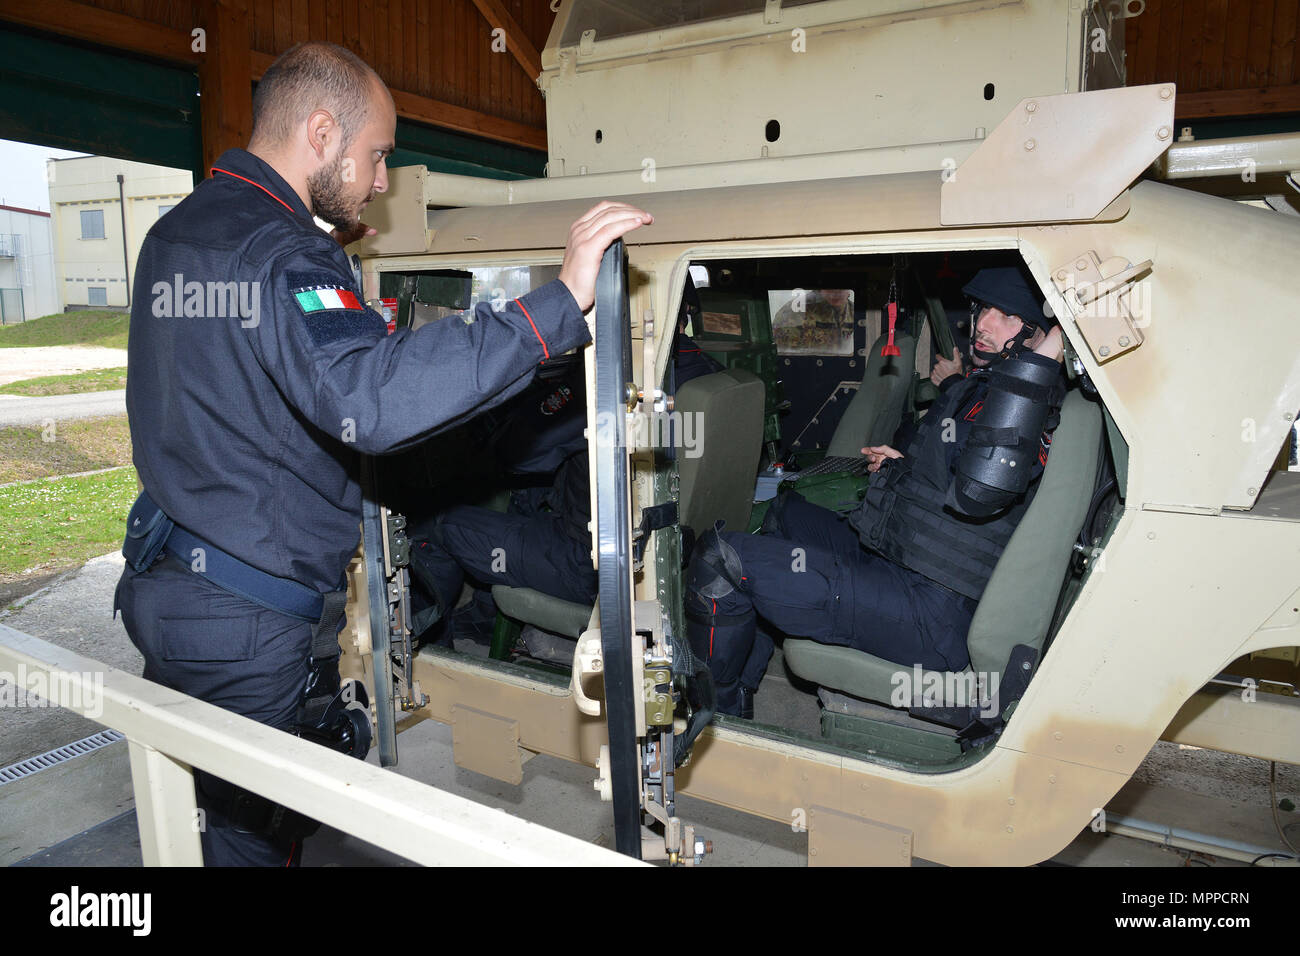 Italian Carabinieri of the 7th Regiment Carabinieri “Laives” Bolzano and 13th Regiment Carabinieri “Friuli Venezia Giulia” Gorizia conduct training using the High Mobility Multipurpose Wheeled Vehicle (HMMWV) egress assistance trainer (HEAT), at Caserma Ederle Vicenza, Italy, April 6, 2017. The simulator allows soldiers to practice exit from vehicles, skills and engage in realistic scenarios. Carabinieri use U.S. Army RTSD South equipment to enhance the bilateral relations and to expand levels of cooperation and the capacity of the personnel involved in joint operations. (U.S. Army photo by Vi Stock Photo